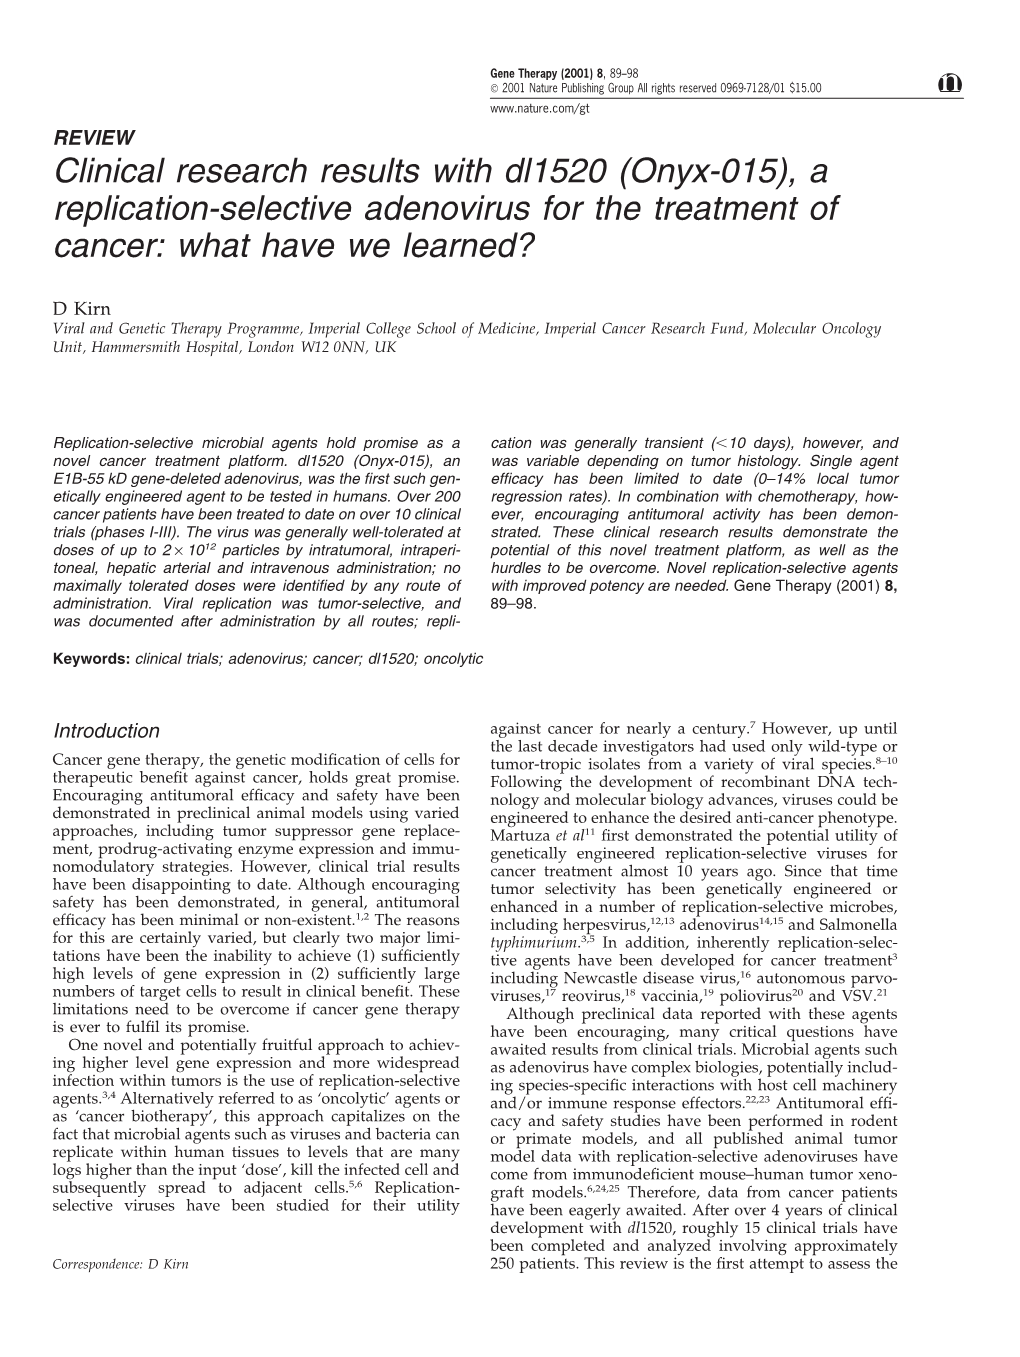 (Onyx-015), a Replication-Selective Adenovirus for the Treatment of Cancer: What Have We Learned?